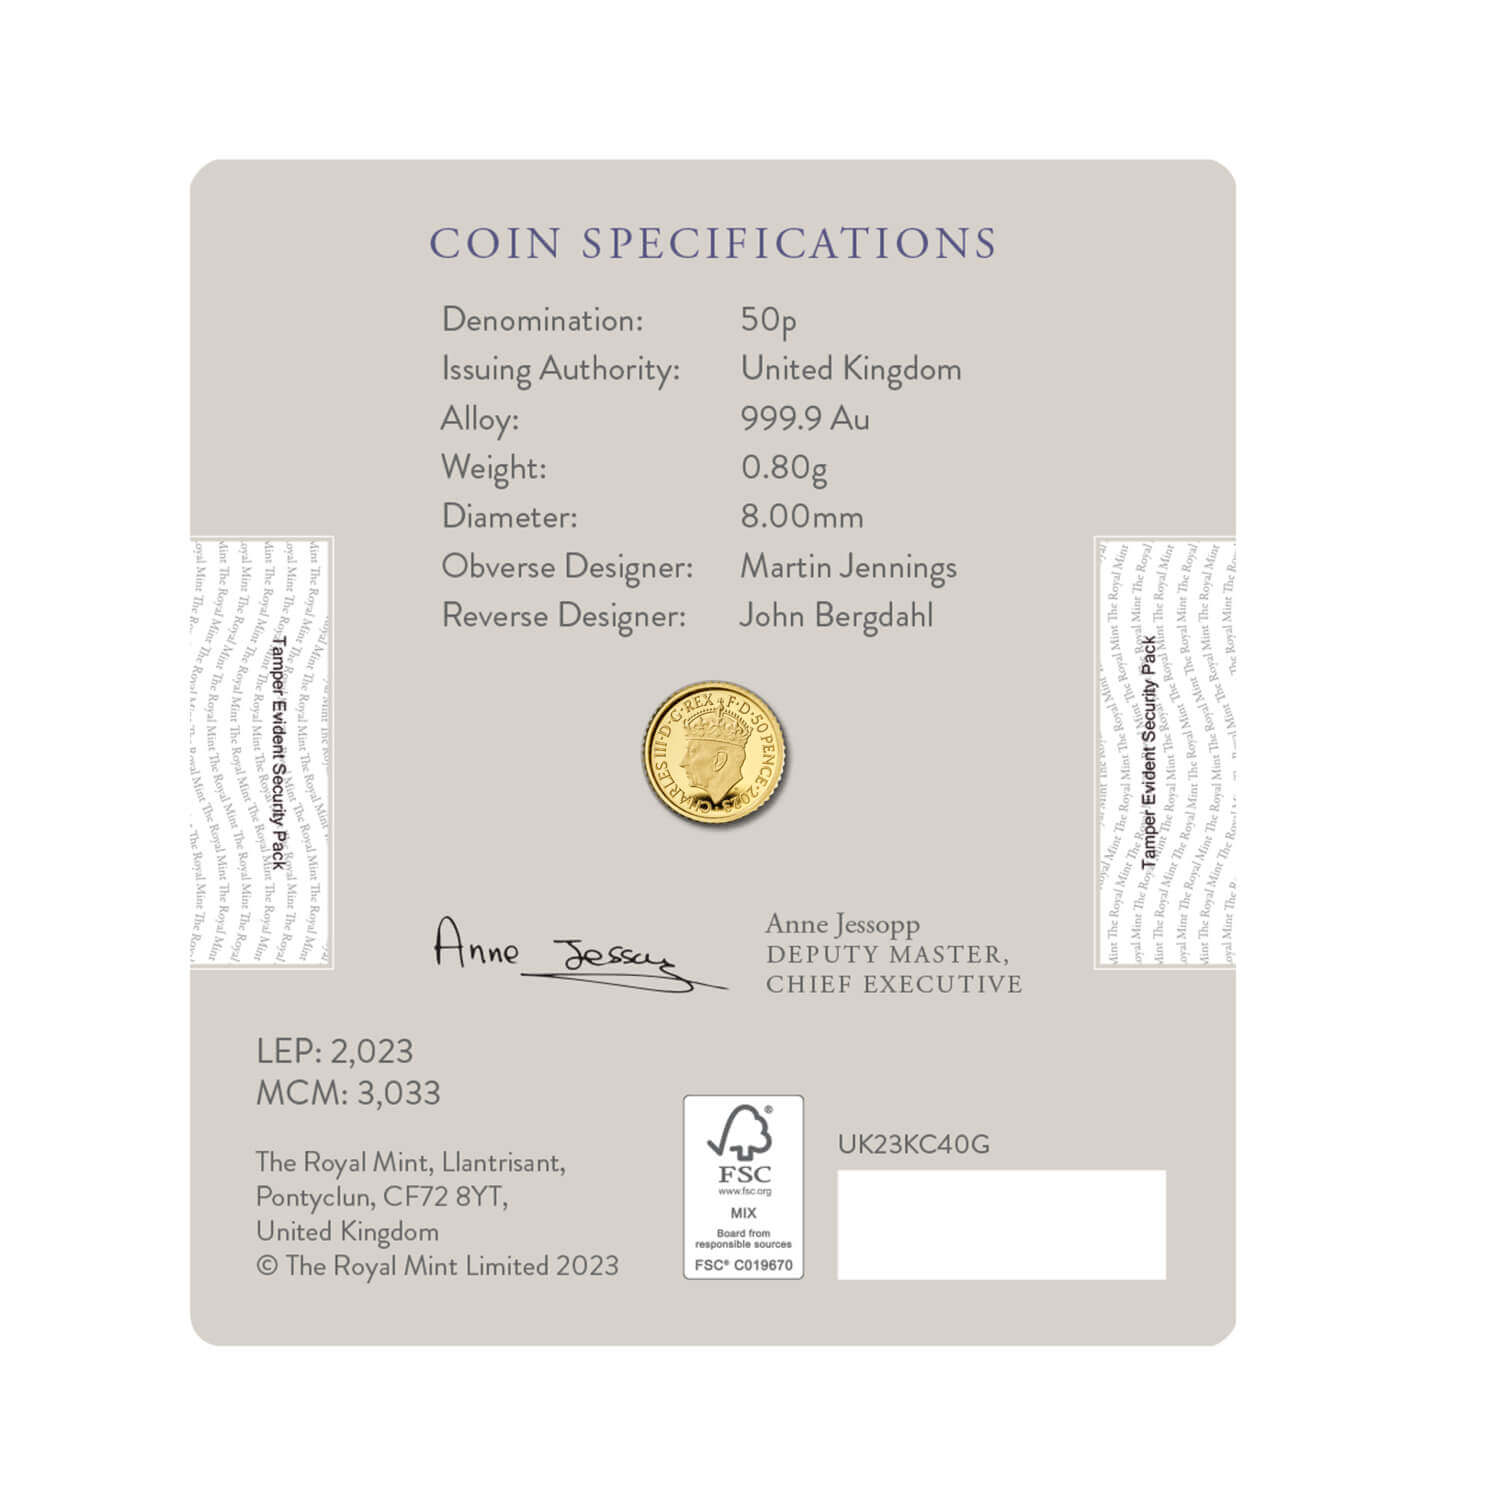 uk23kc40g-the-coronation-of-his-majesty-king-charles-iii-2023-uk-1-40th-oz-gold-proof-coin-blister-back-1500x1500-f3a2c67.jpg